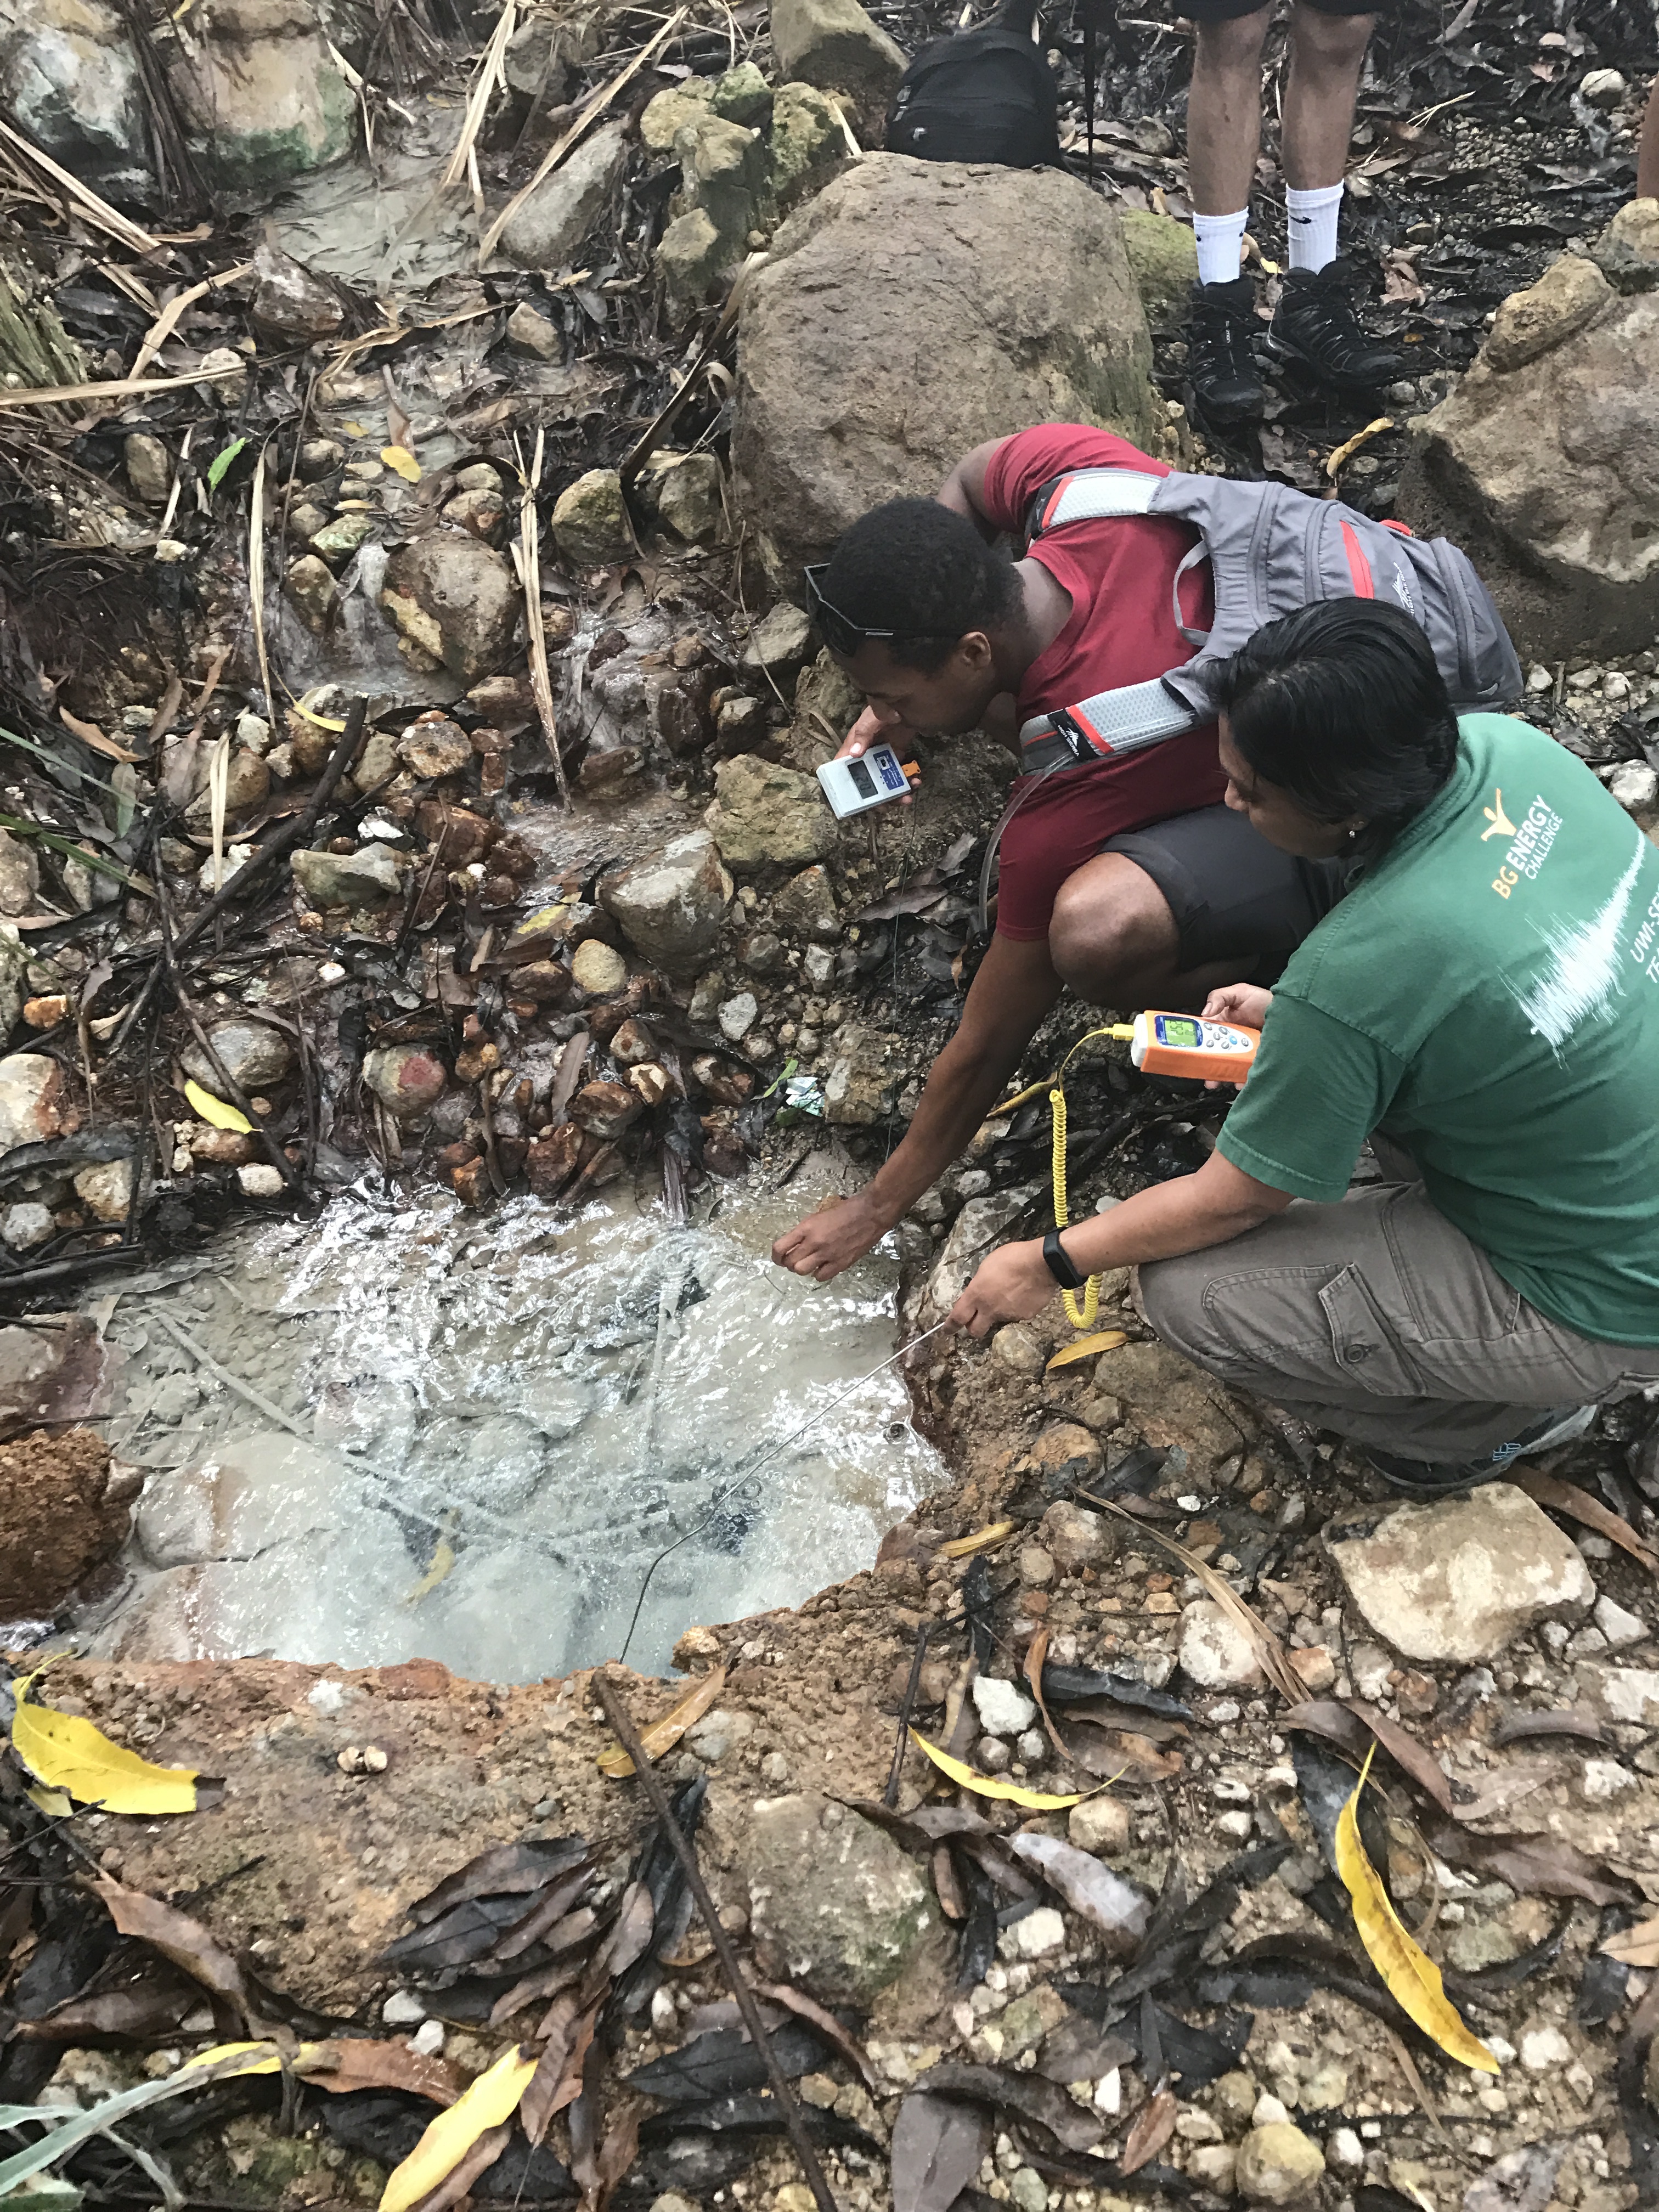 Two scientists crouch amongst boulders and leaves to collect water samples from a sinkhole.